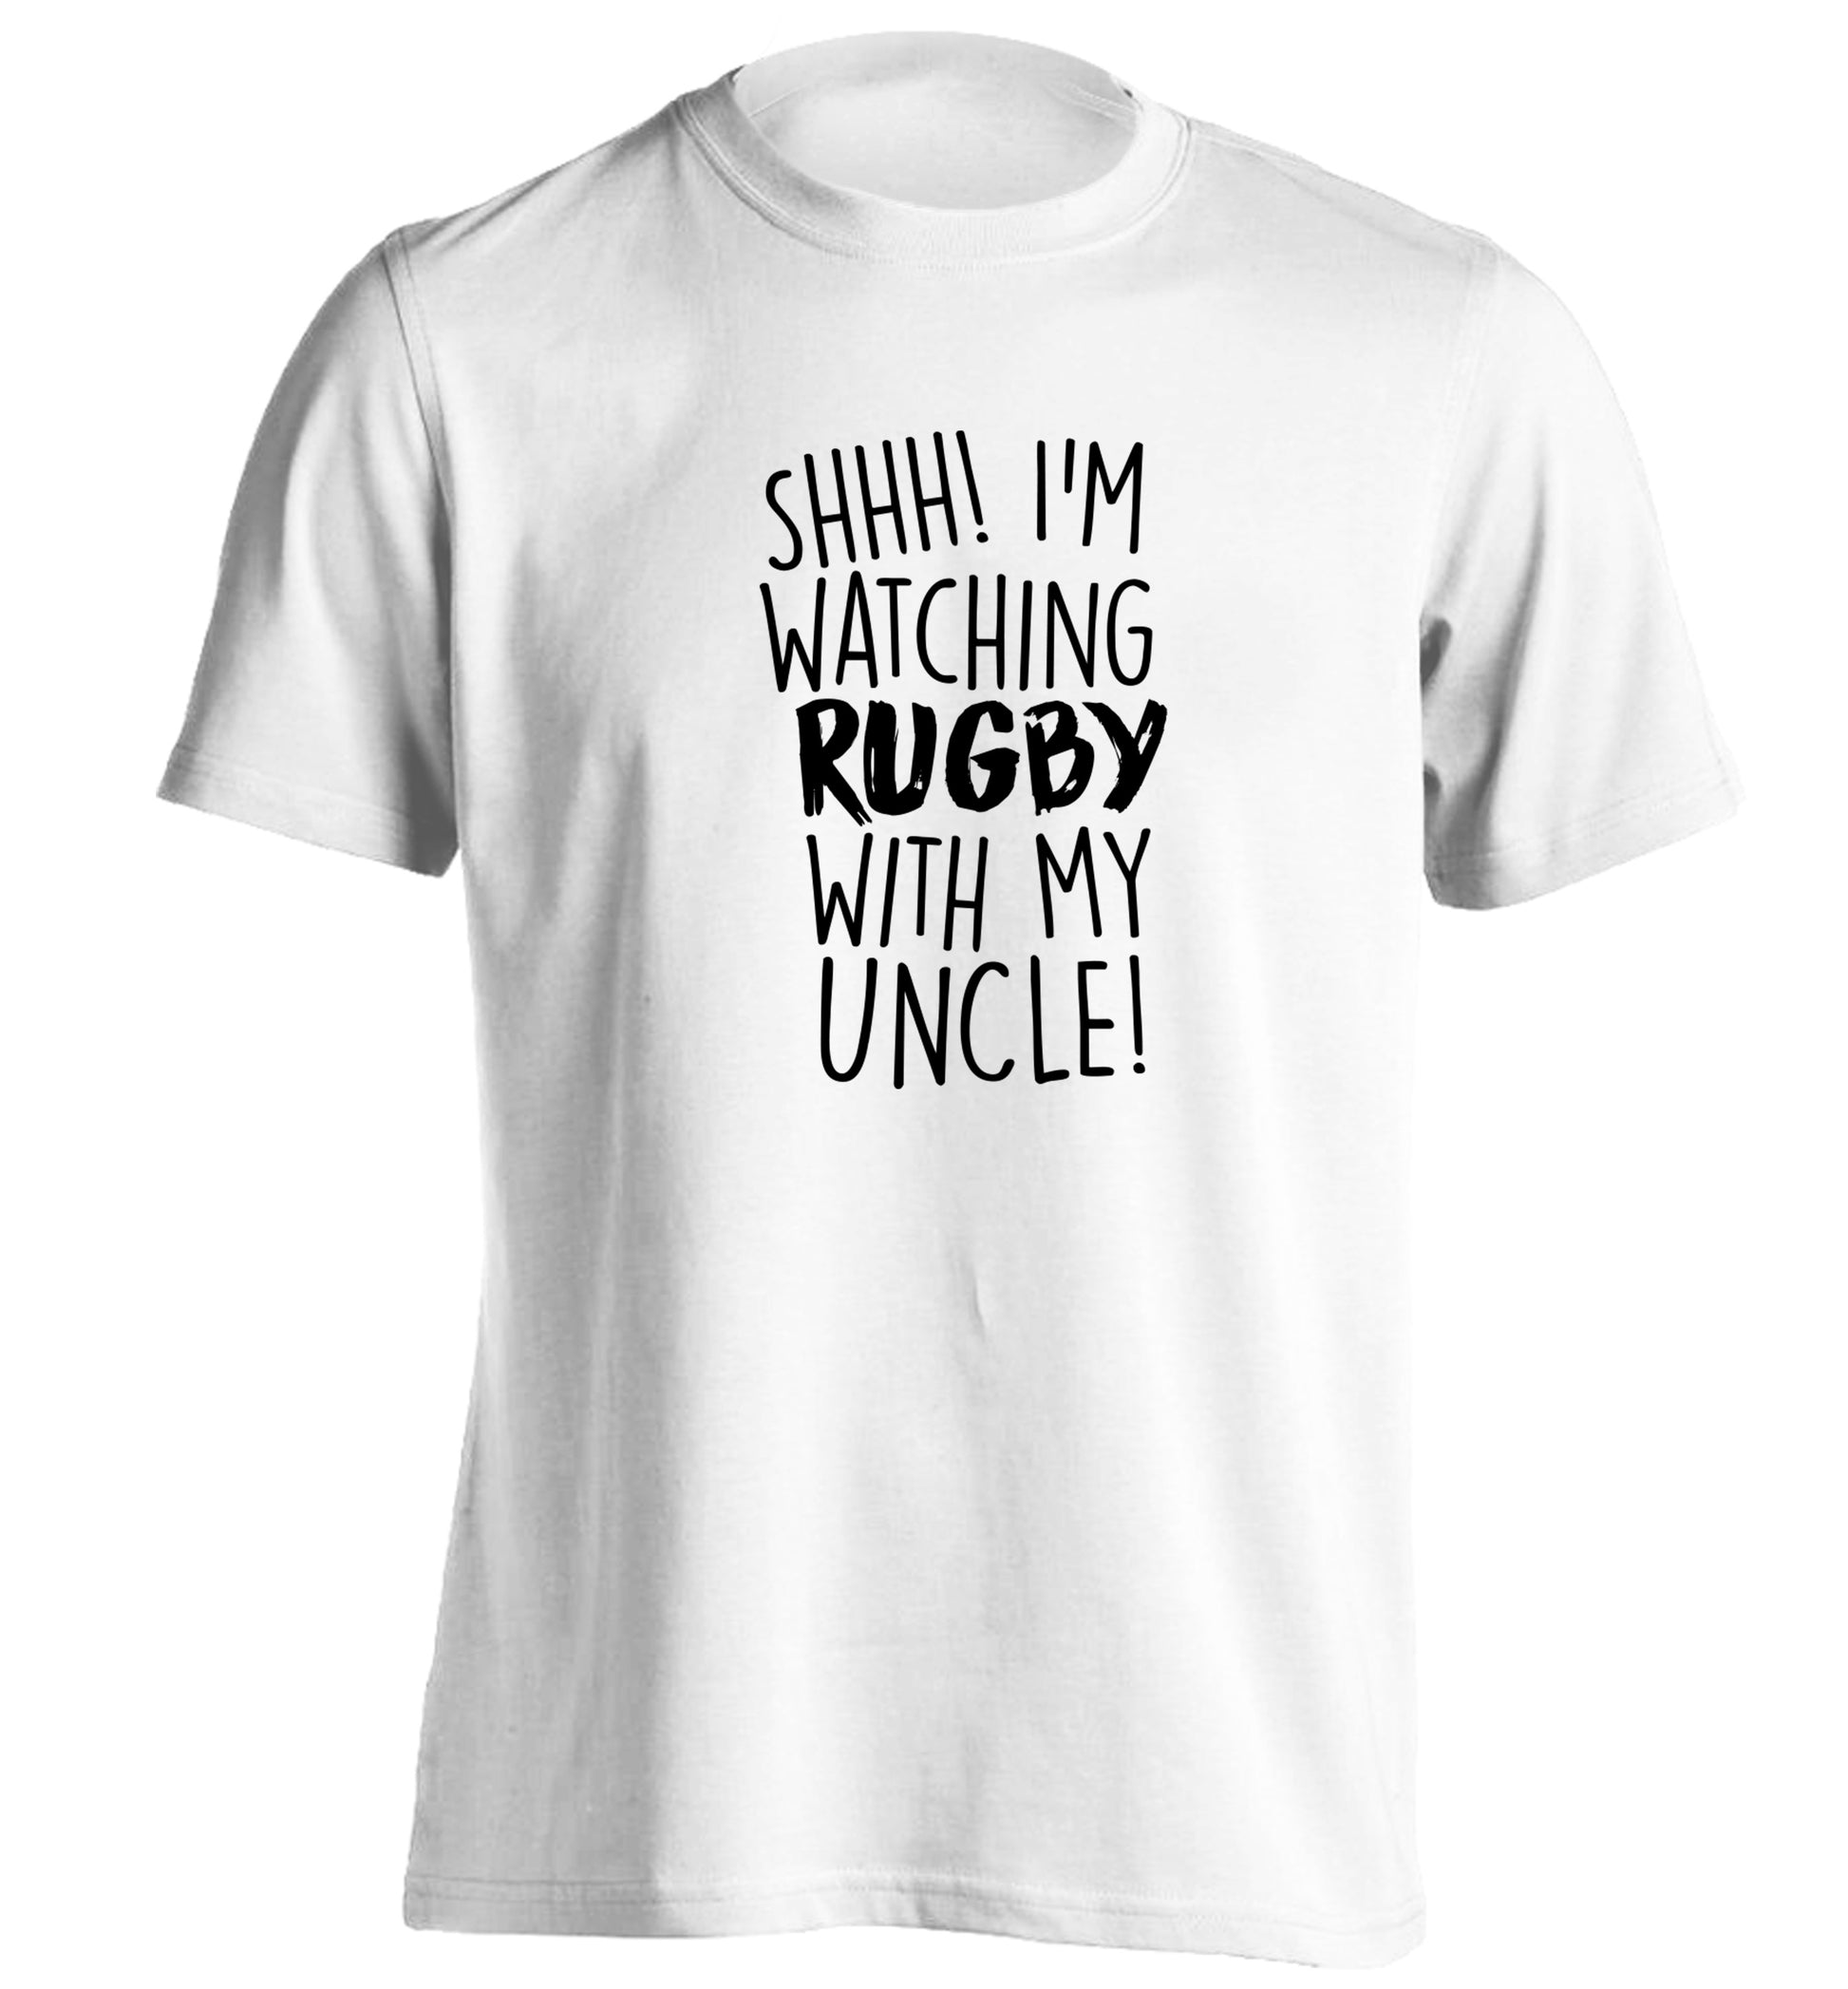 Shh.. I'm watching rugby with my uncle adults unisex white Tshirt 2XL